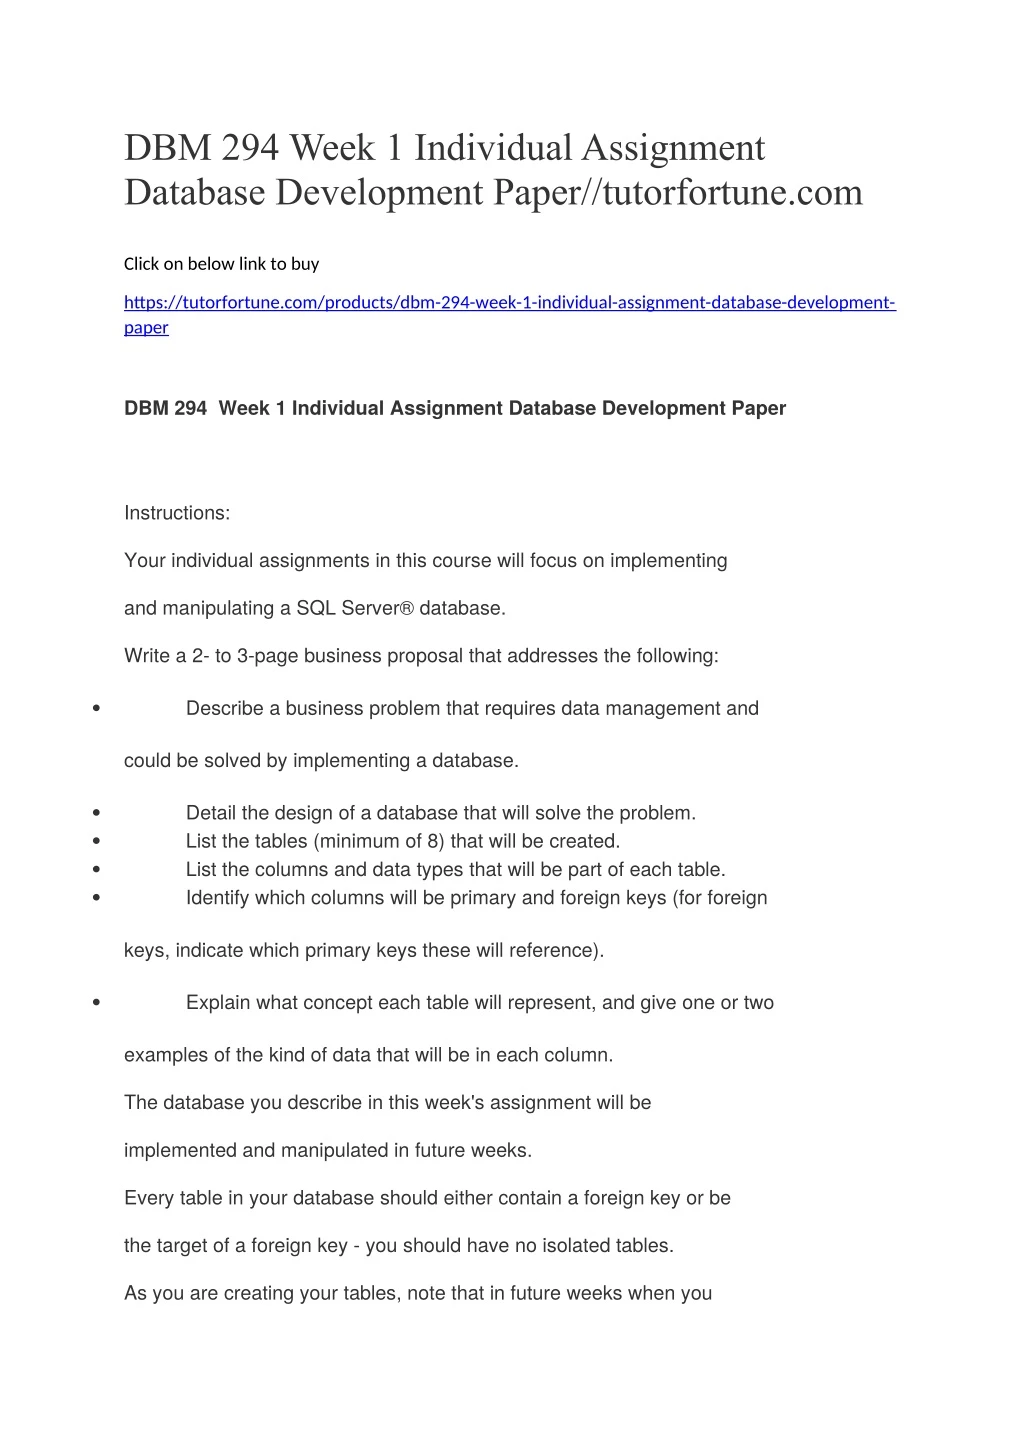 dbm 294 week 1 individual assignment database